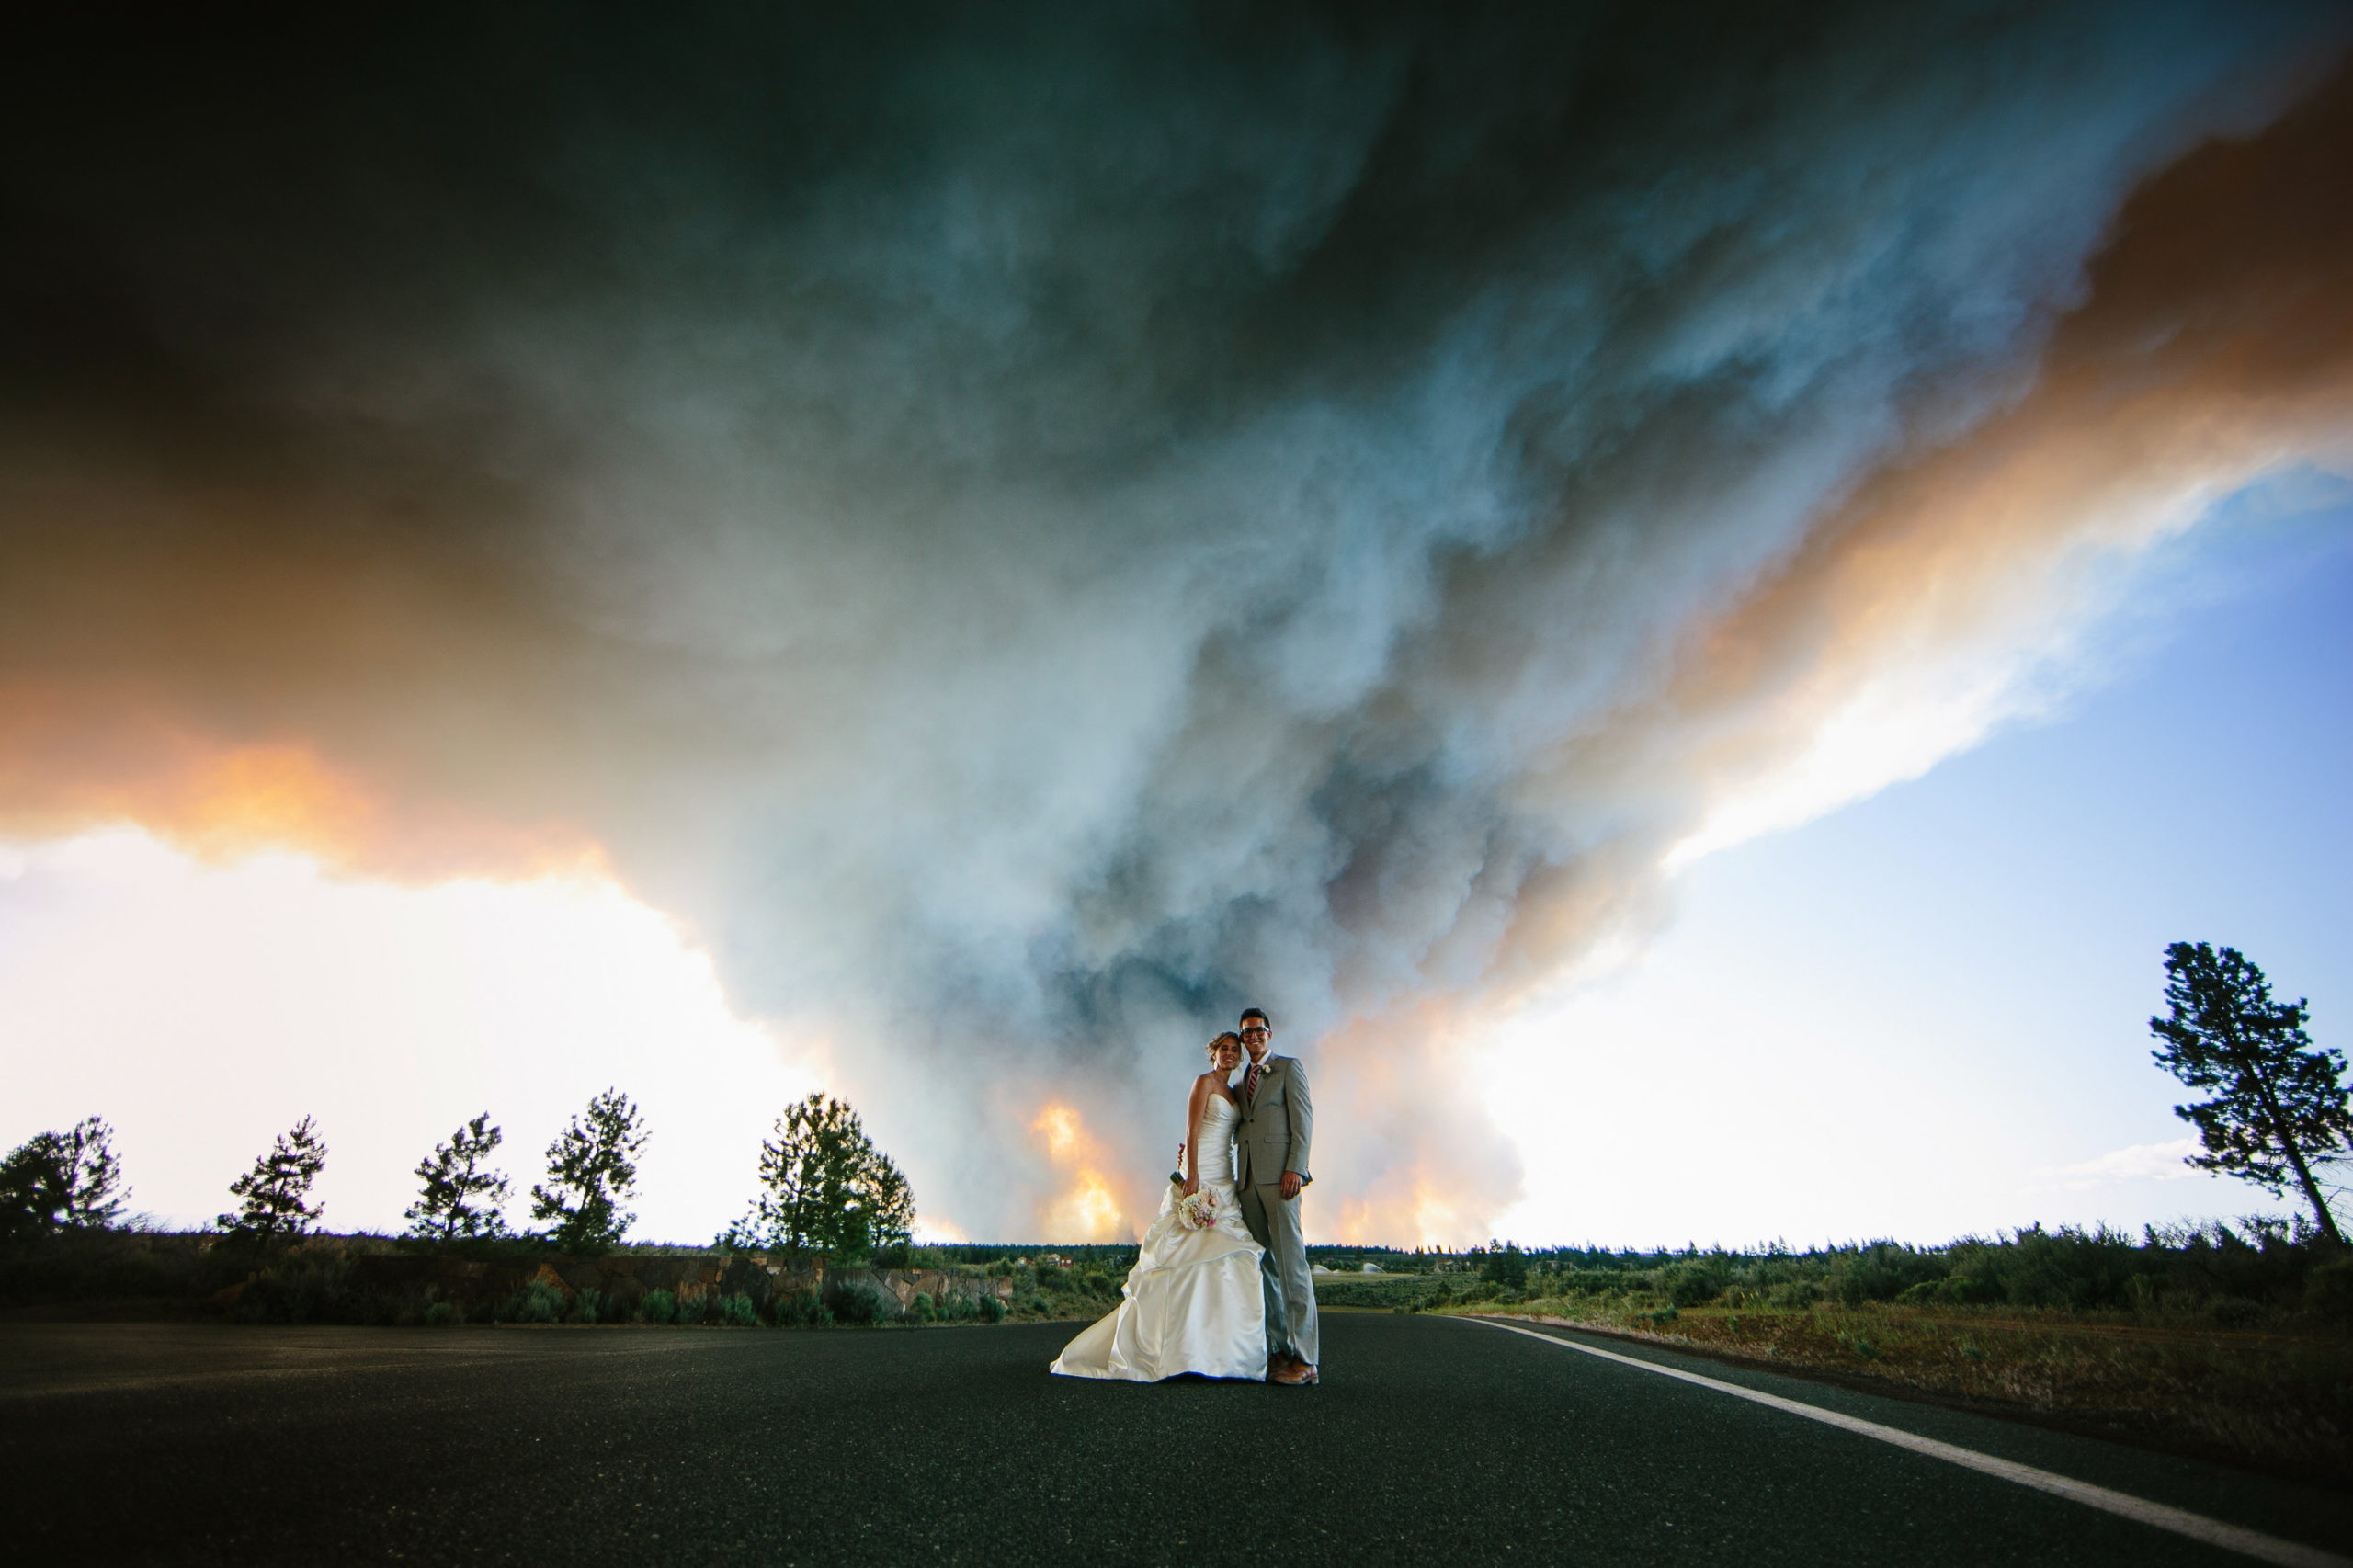 How This Couple Ended Up With The Most Dramatic Wedding Pictures Ever